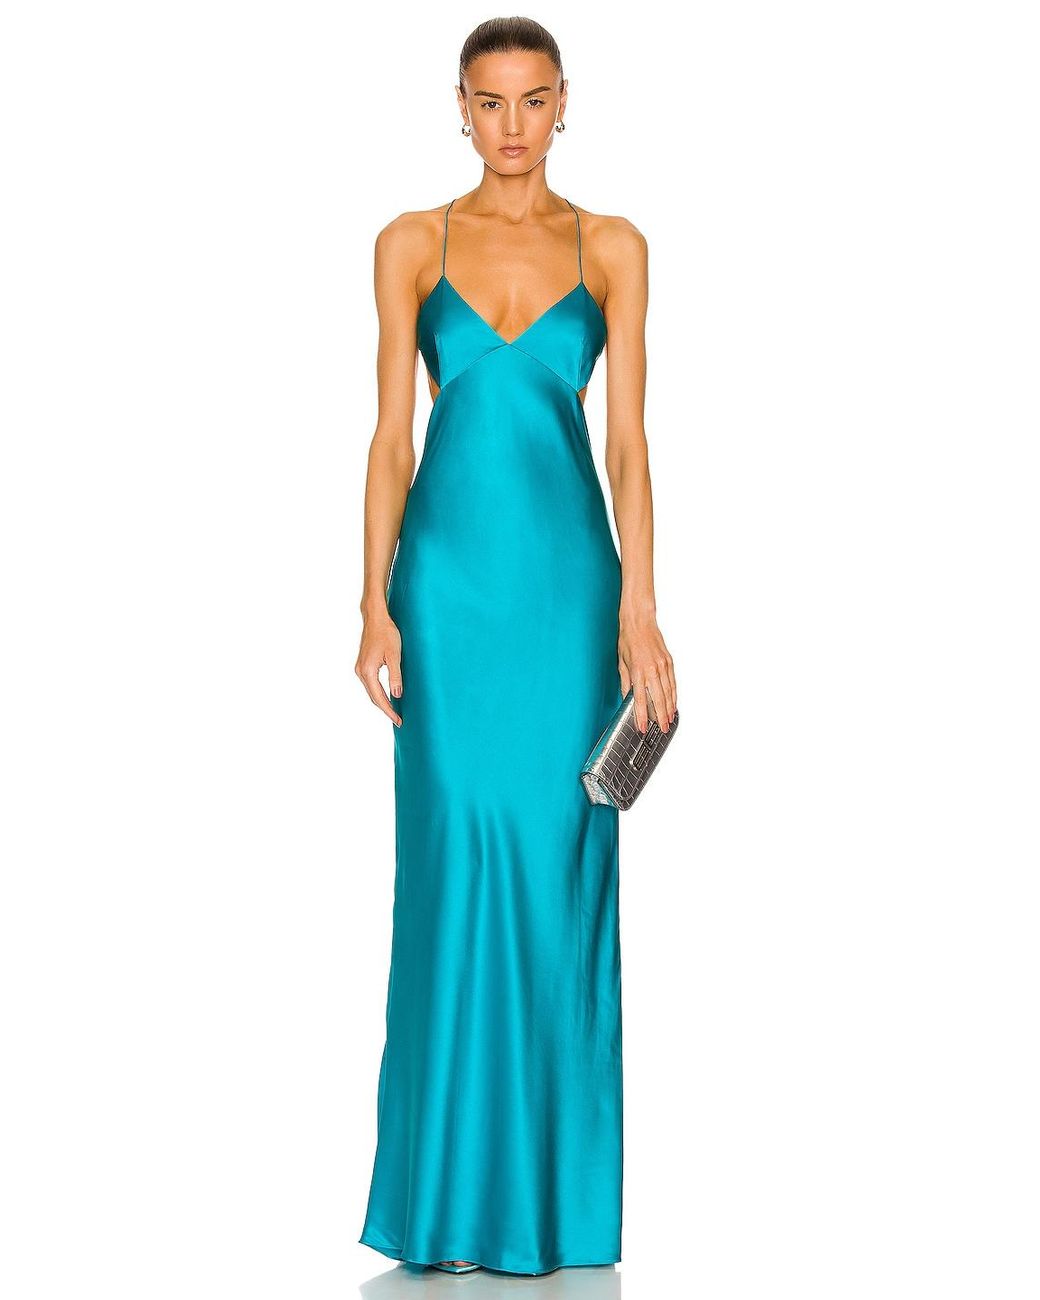 The Sei Cut Out Bias Gown in Blue